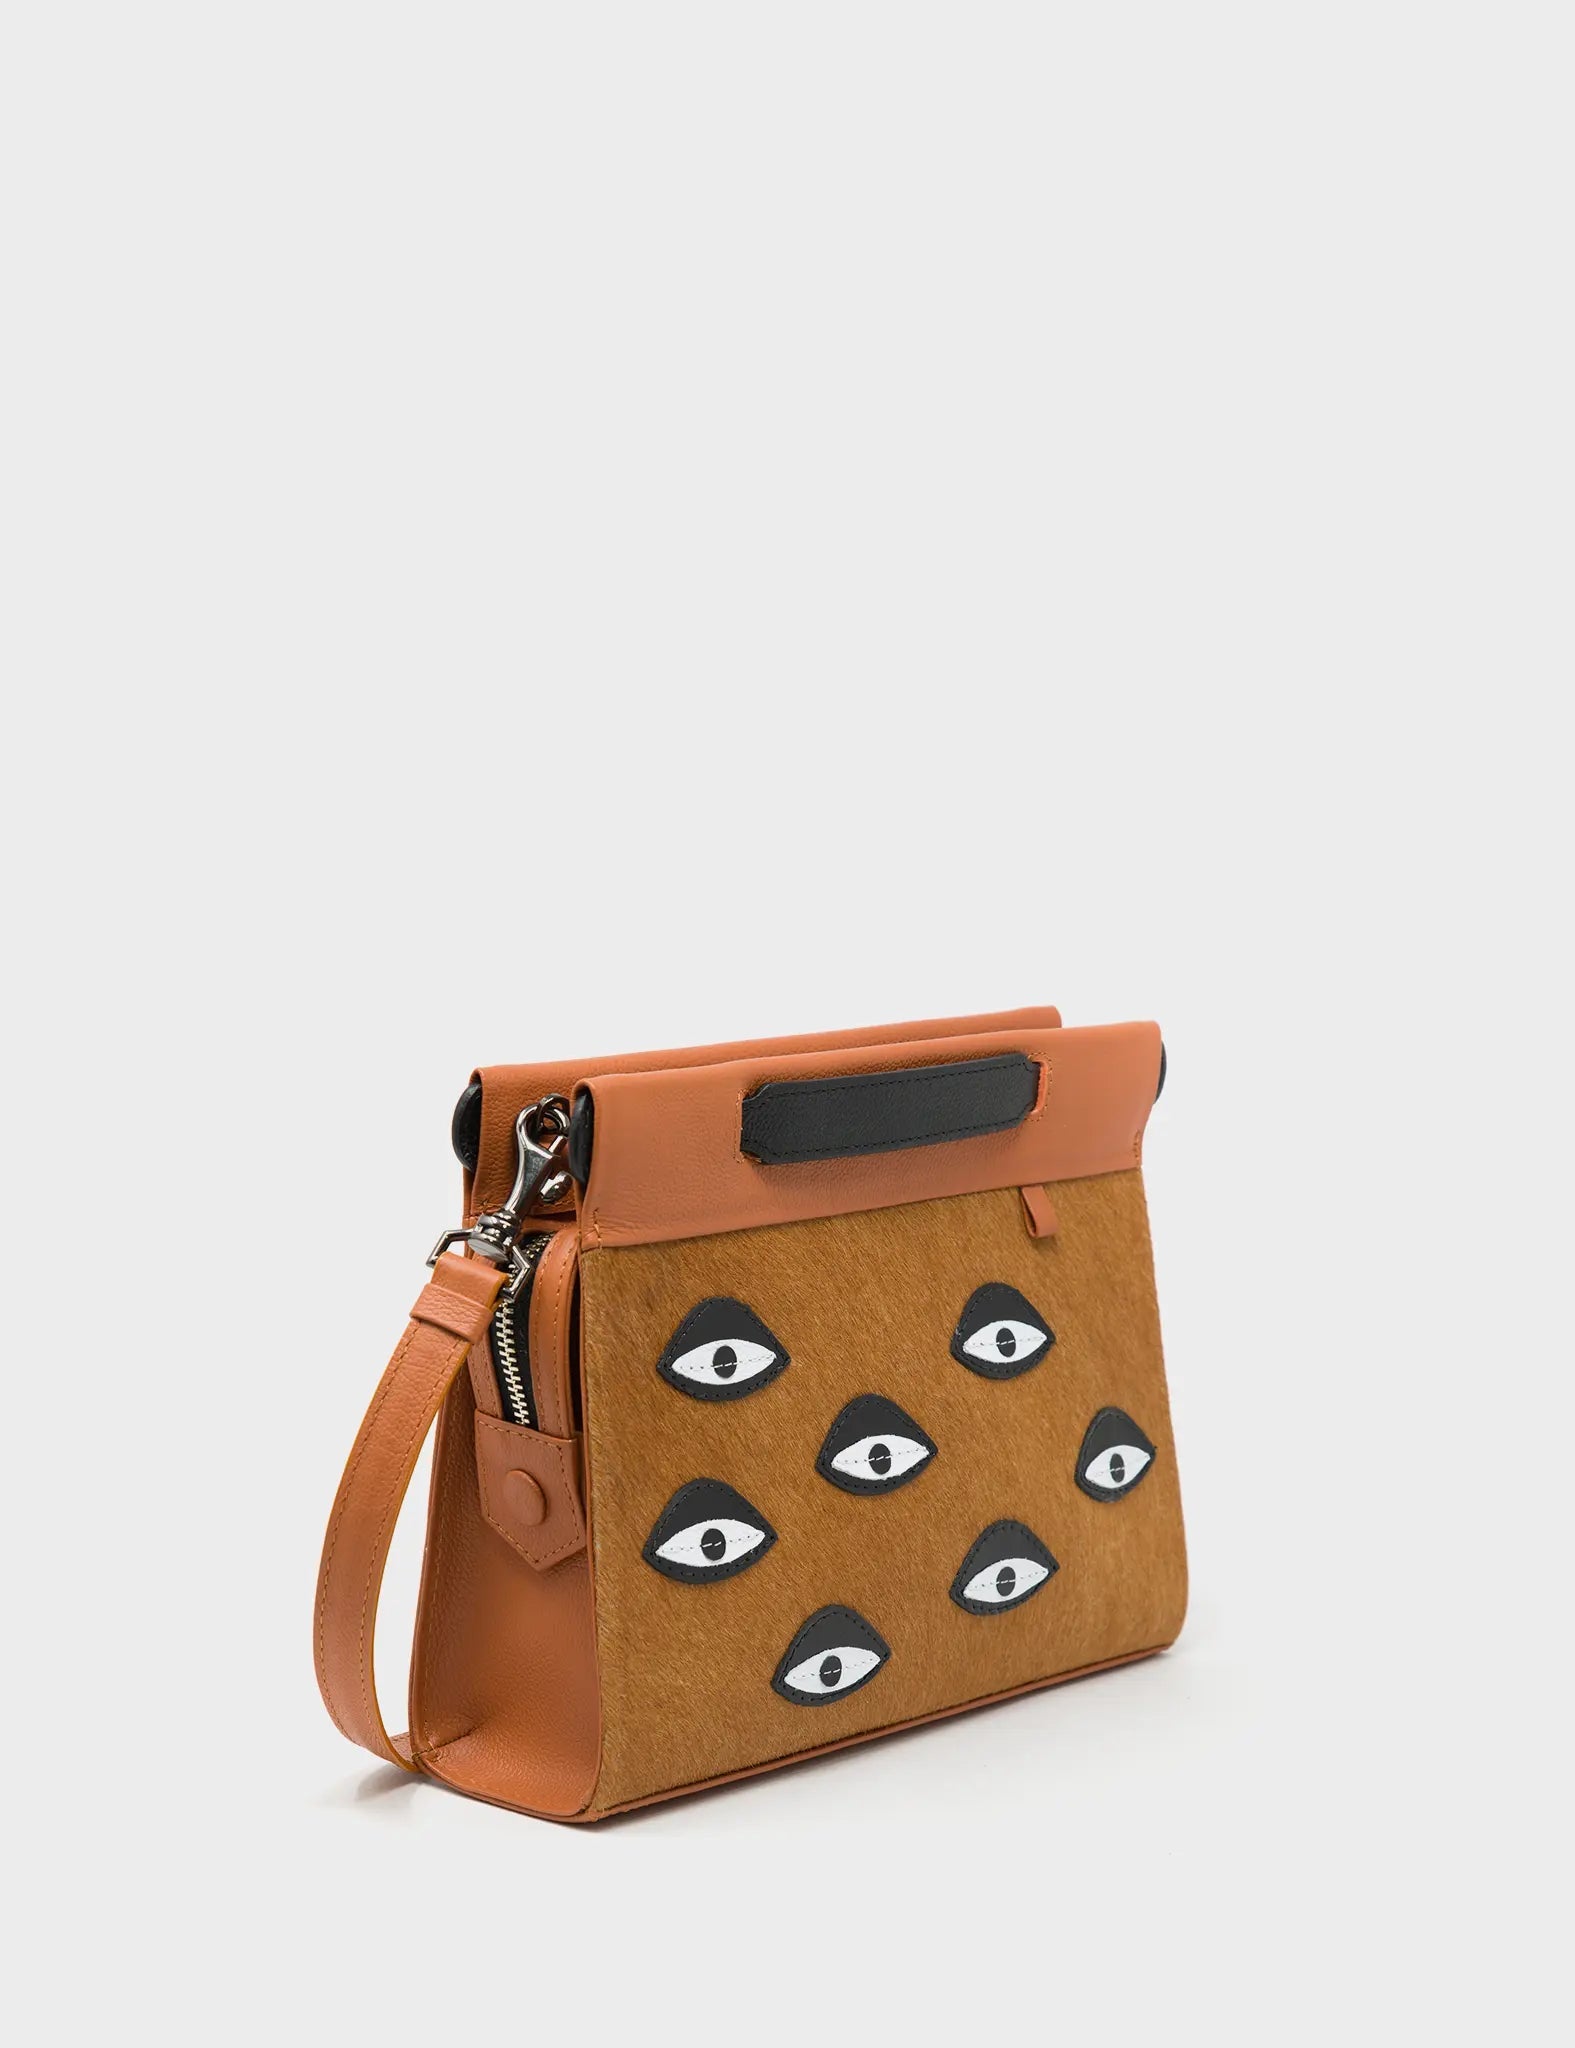 Vali Crossbody Small Caramel Leather Bag - Eyes Applique Adjustable Handle - Front corner angle view